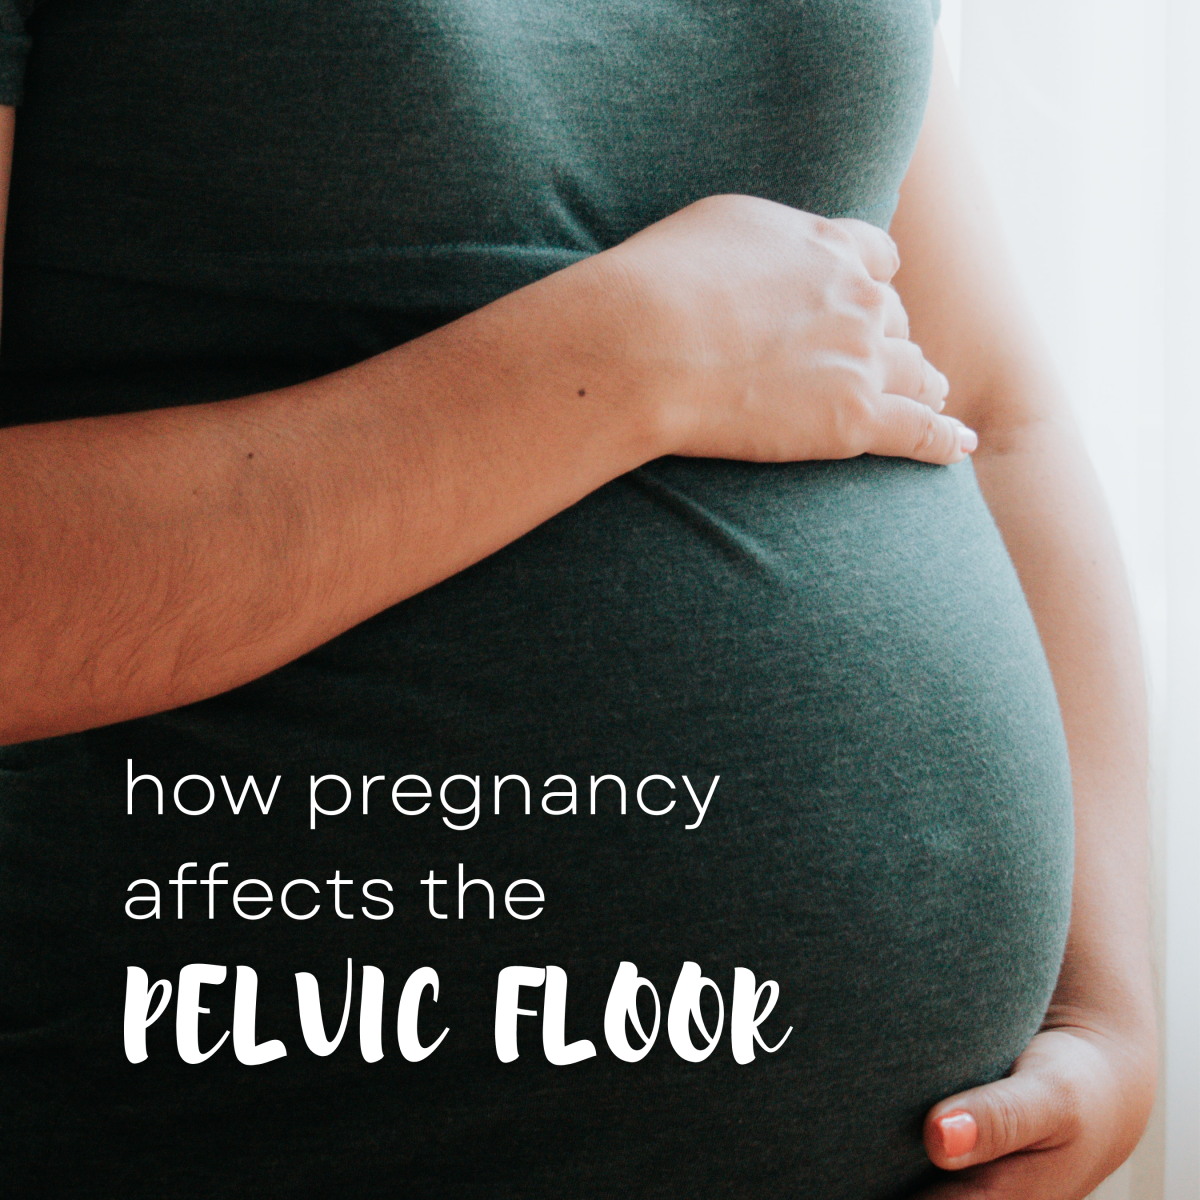 How a woman's pelvic floor is effected during pregnancy and what to do about it.